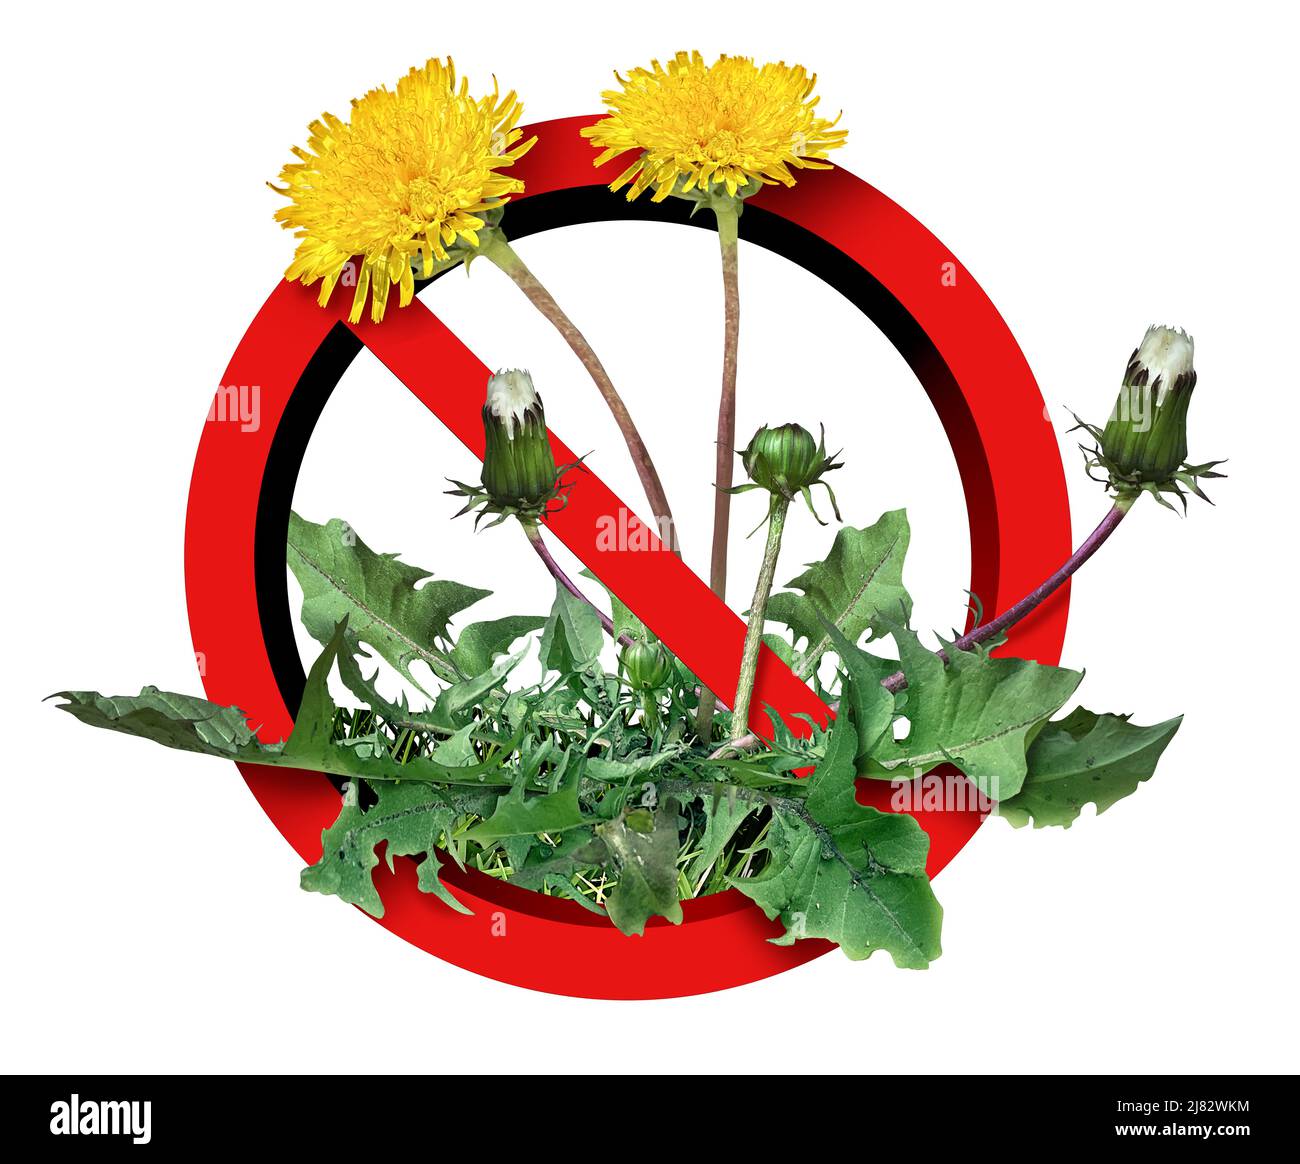 Dandelion weeds ban and banning yard weed problem as dandelion flowers to stop unwanted plant on grass targeted as a symbol for herbicide use in the g Stock Photo